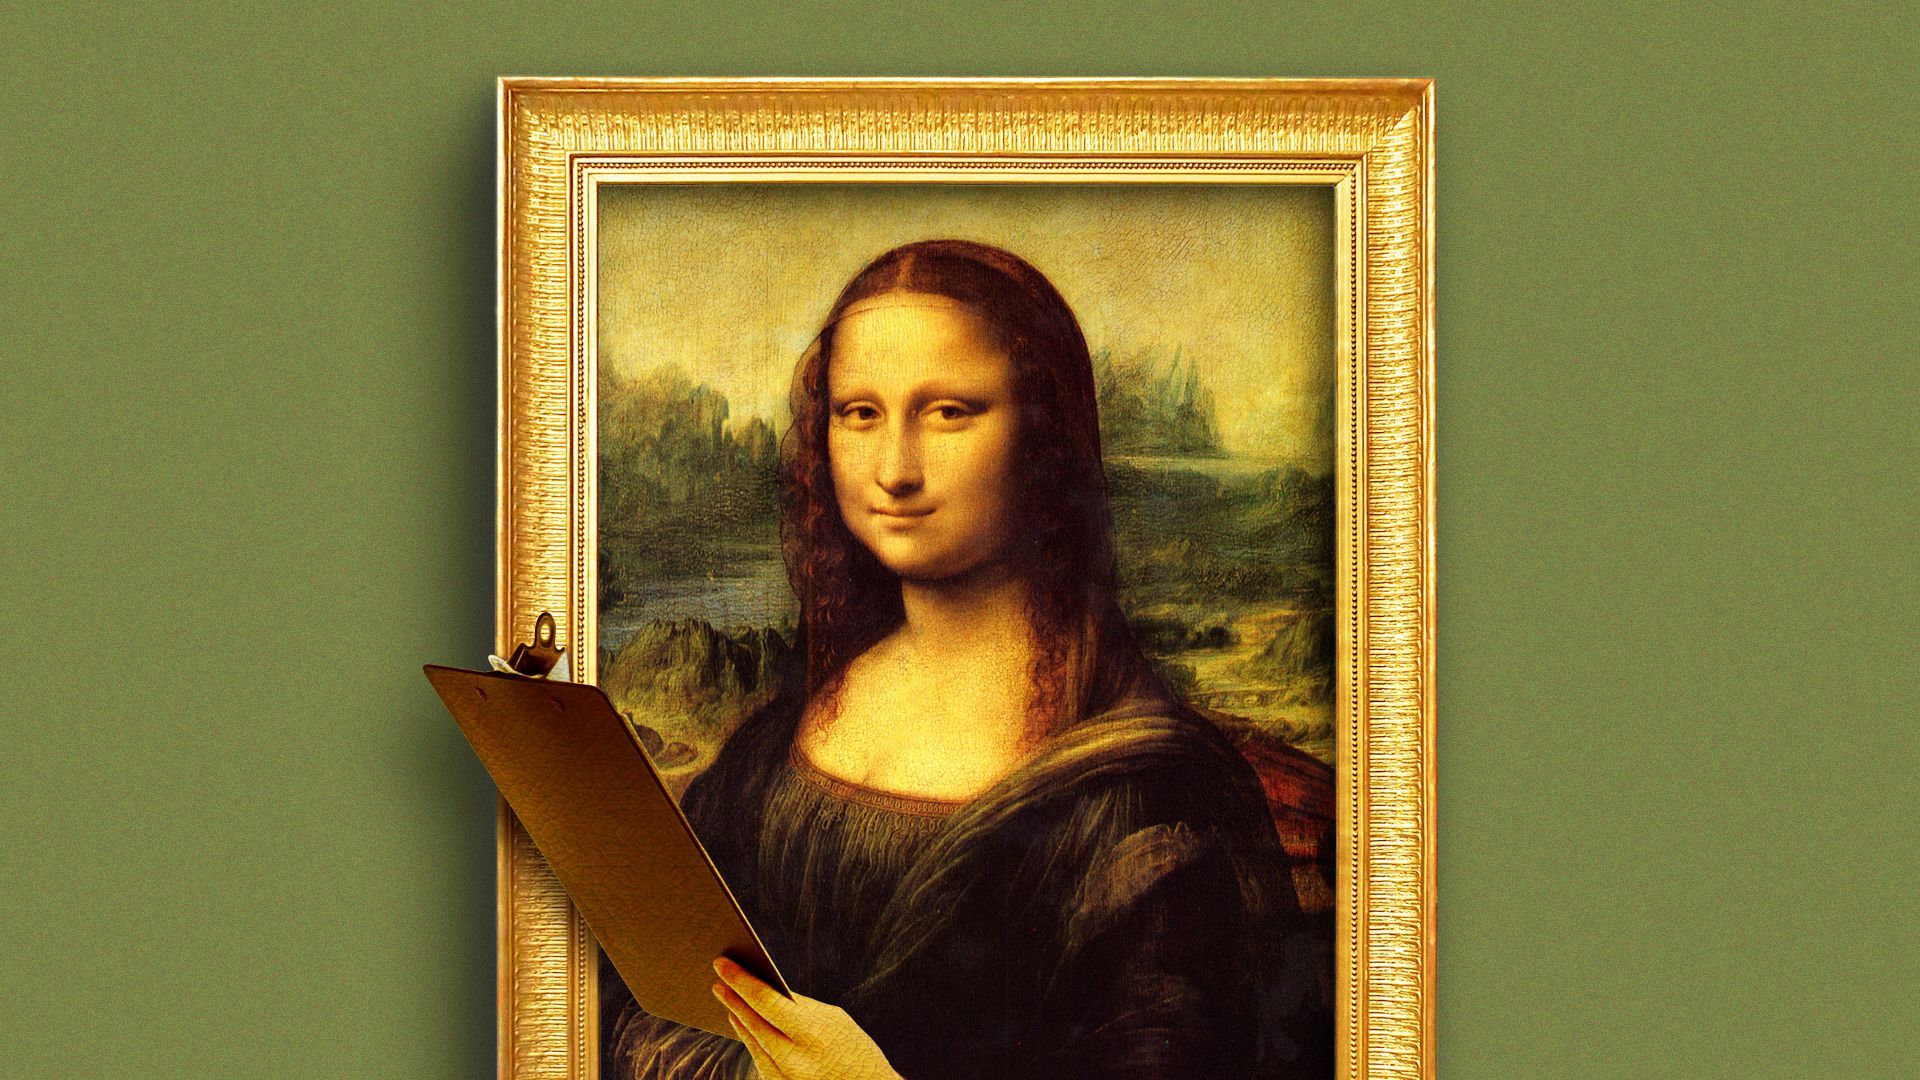 Illustration of the Mona Lisa holding a clipboard.